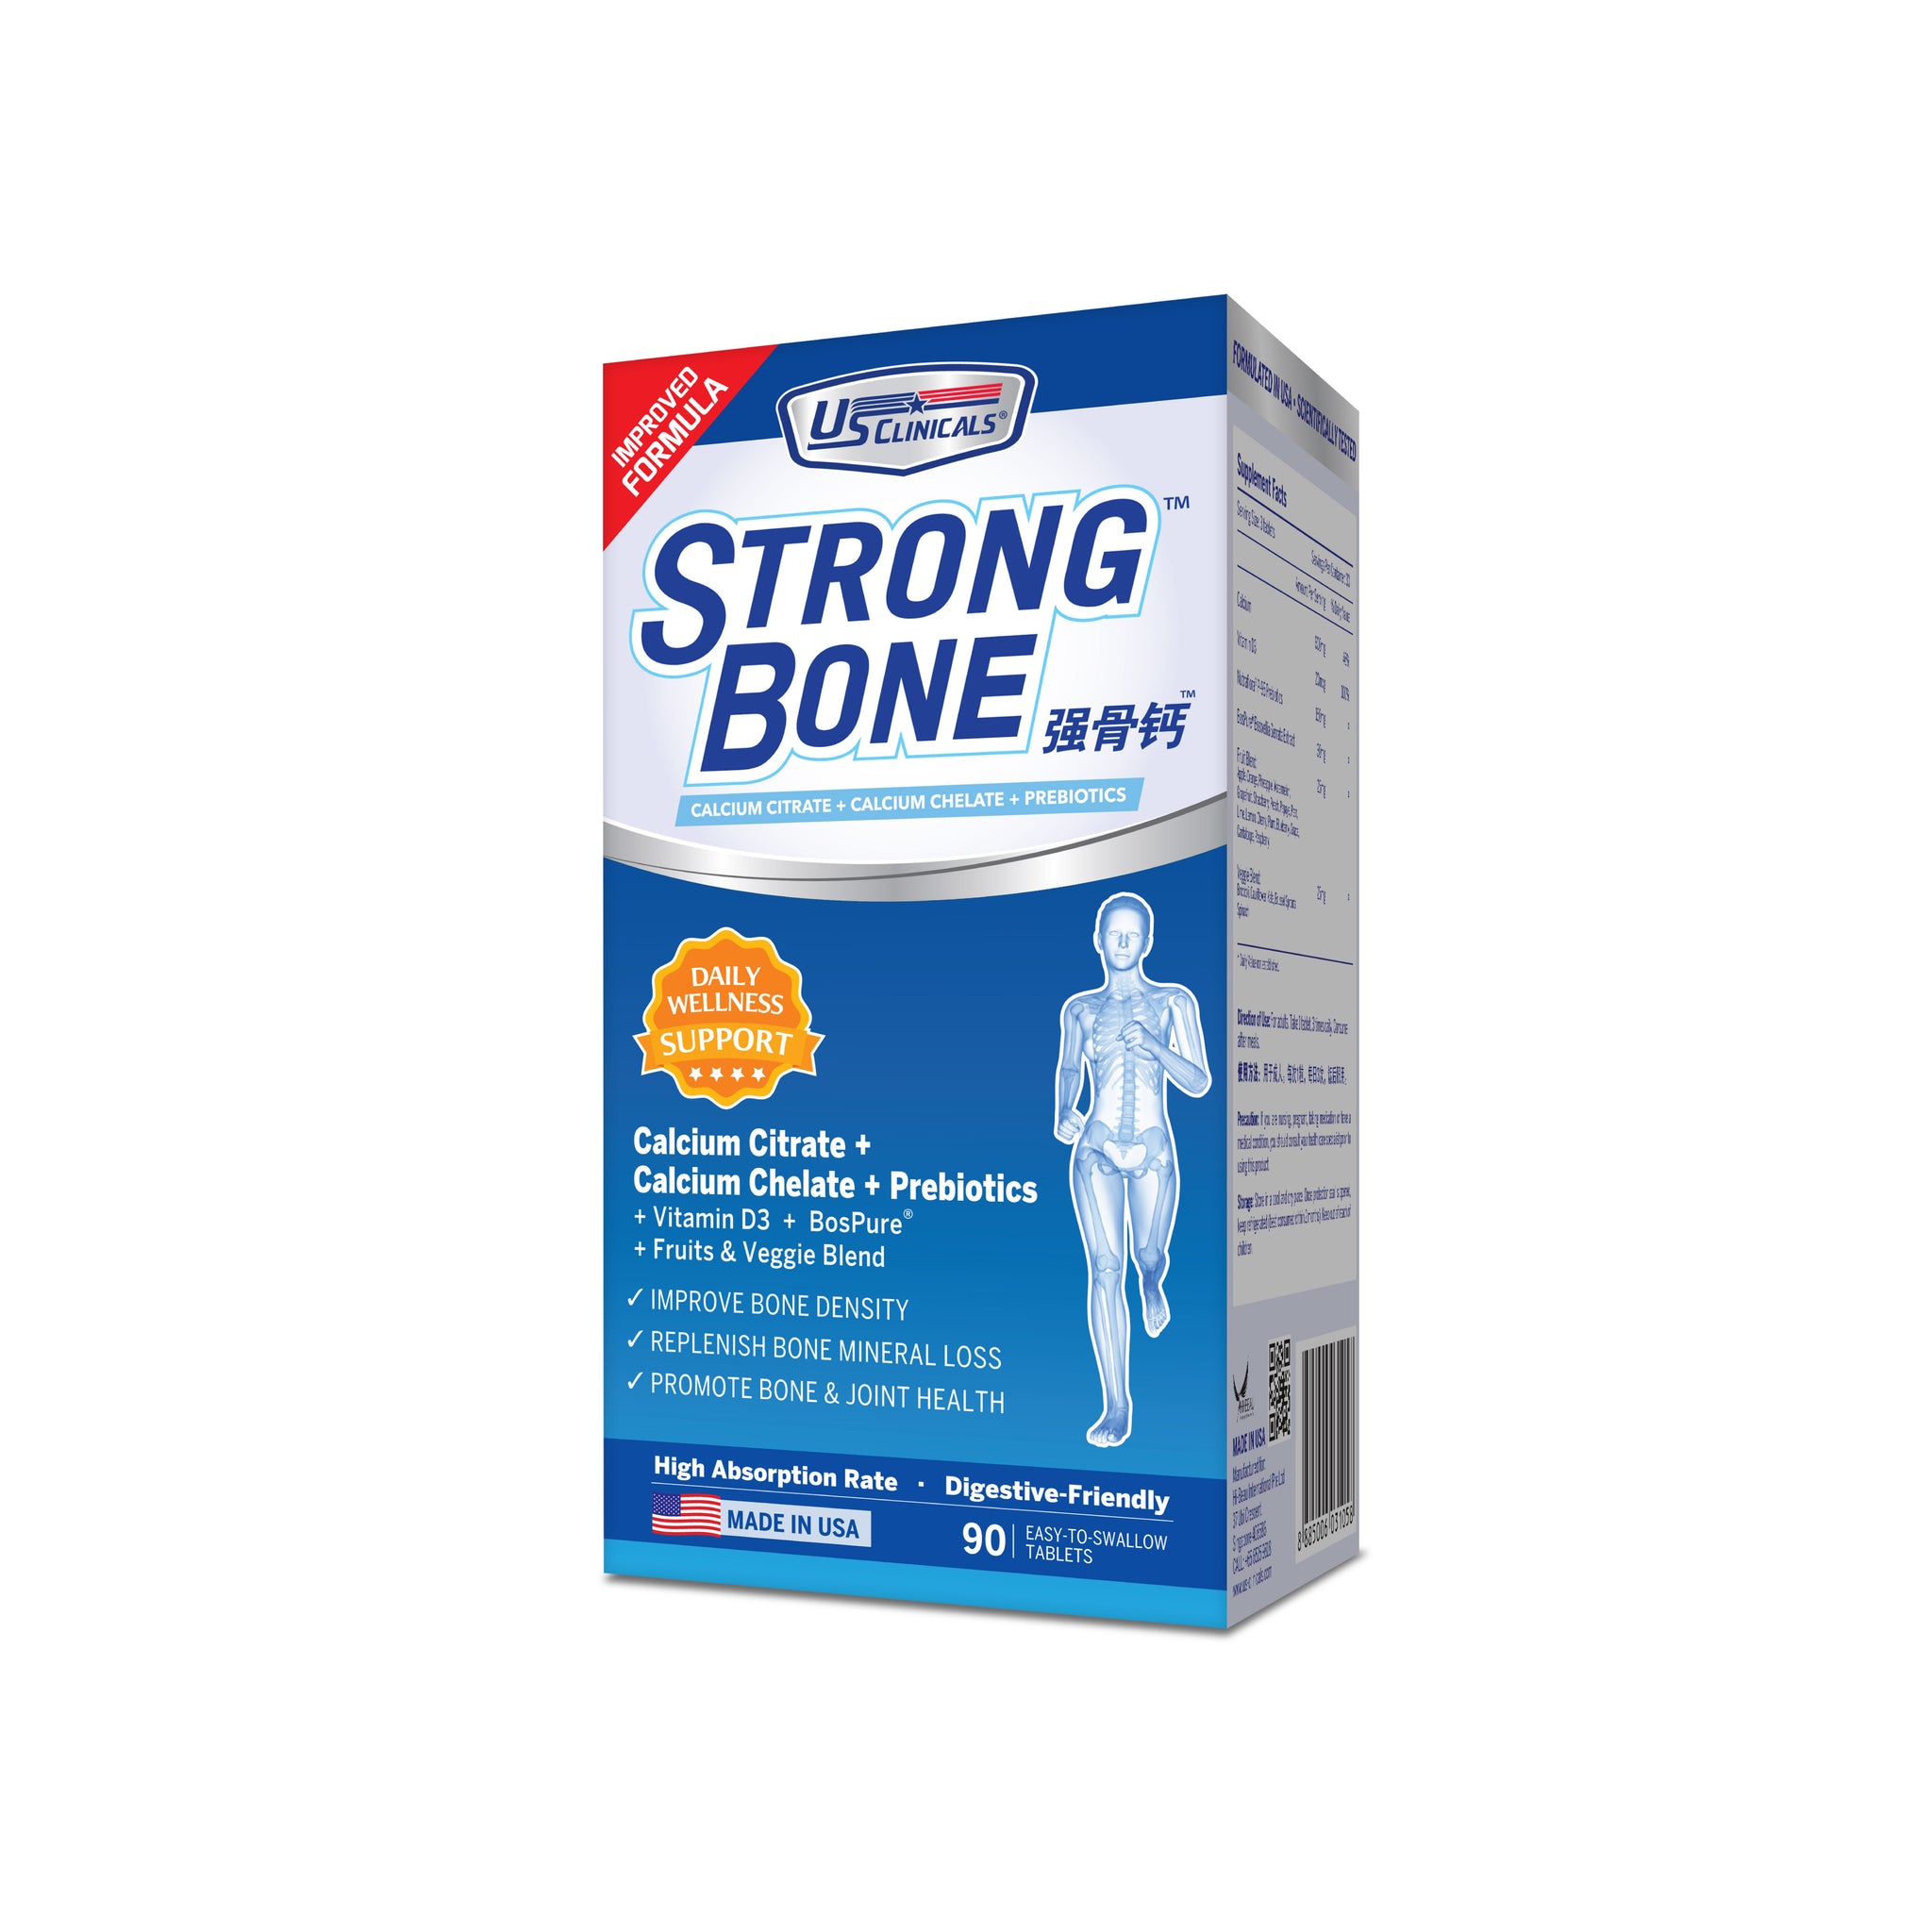 US CLINICALS® STRONGBONE™.